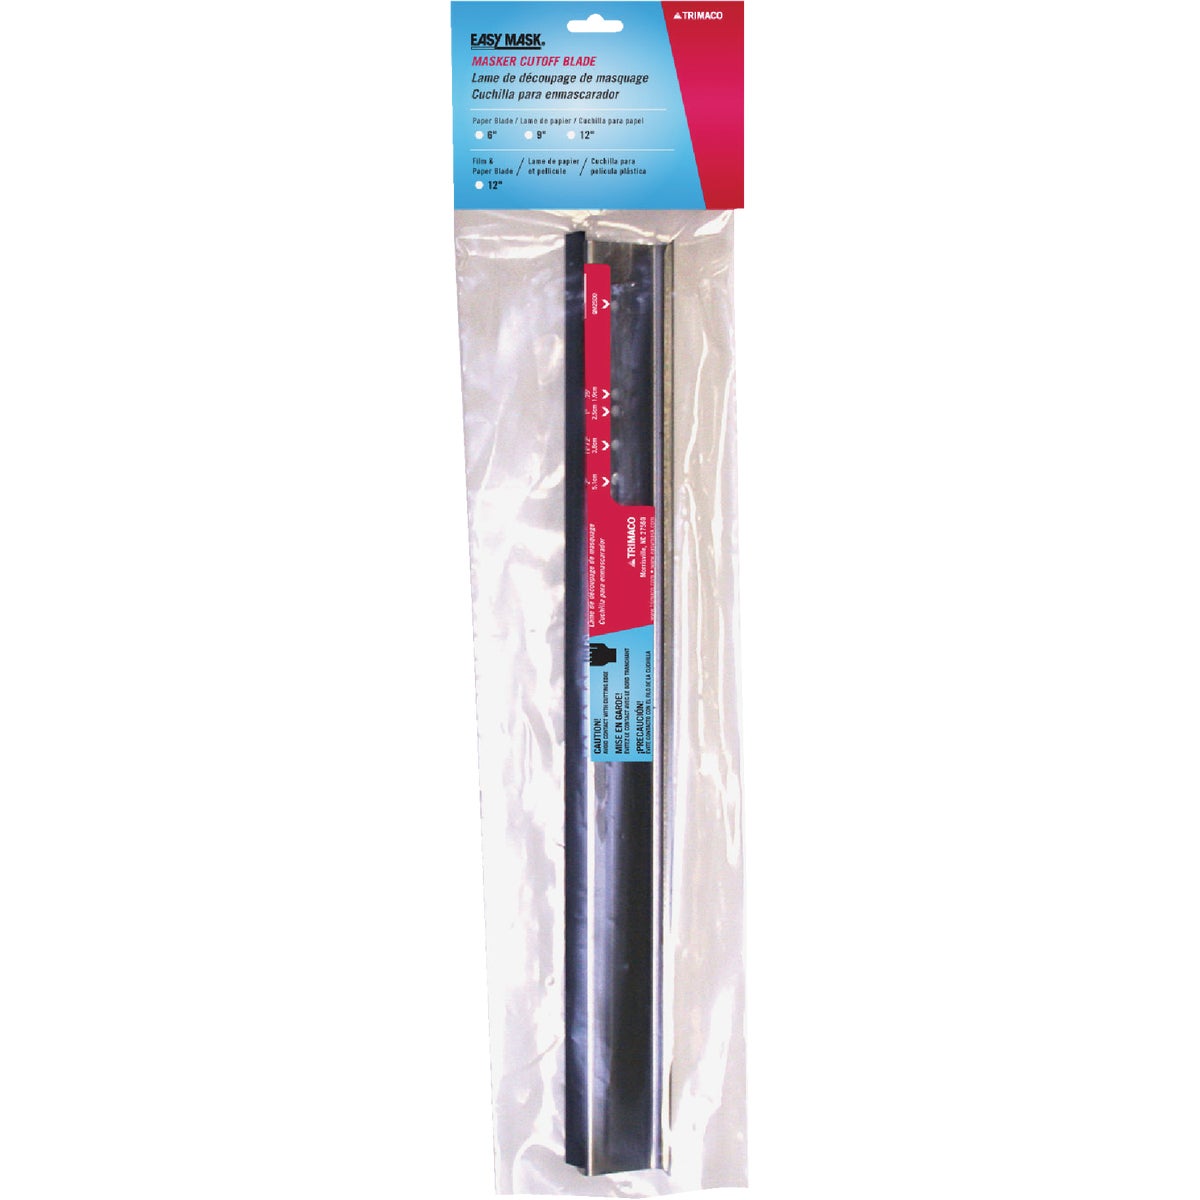 Item 772385, 12" blade attaches to hand masker (sold separately) and is designed to cut 